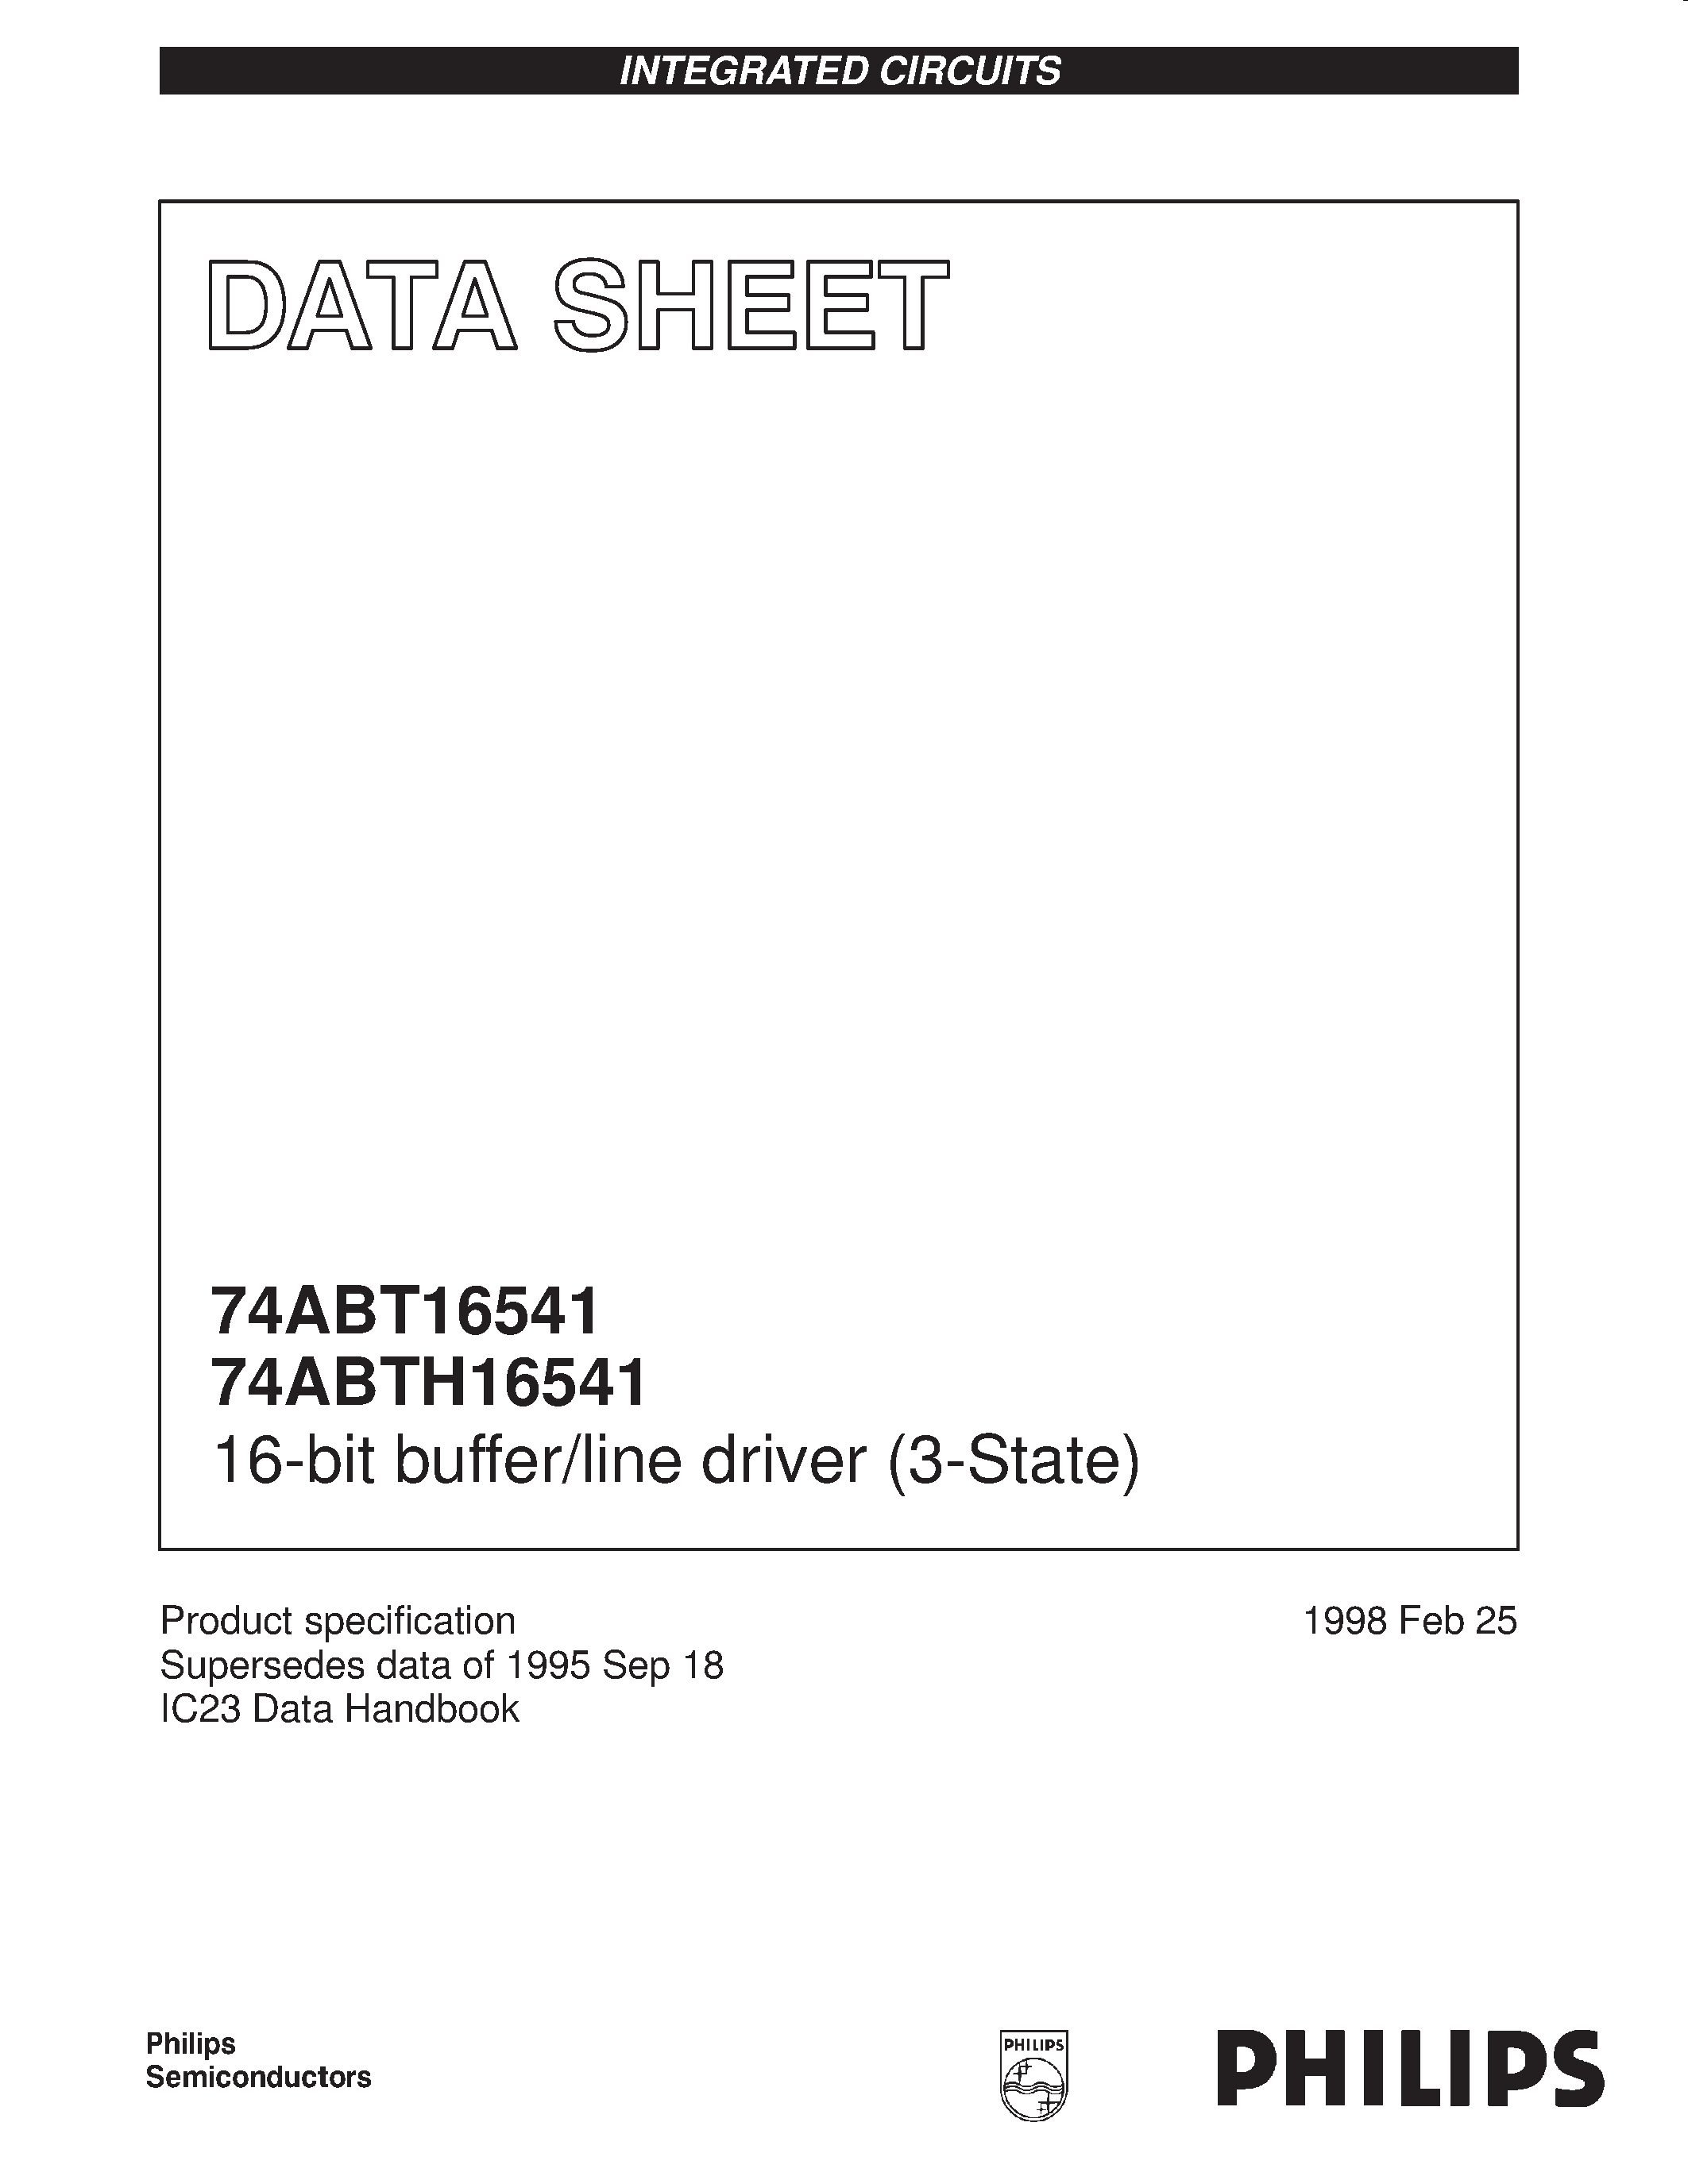 Datasheet 74ABTH16541DL - 16-bit buffer/line driver 3-State page 1